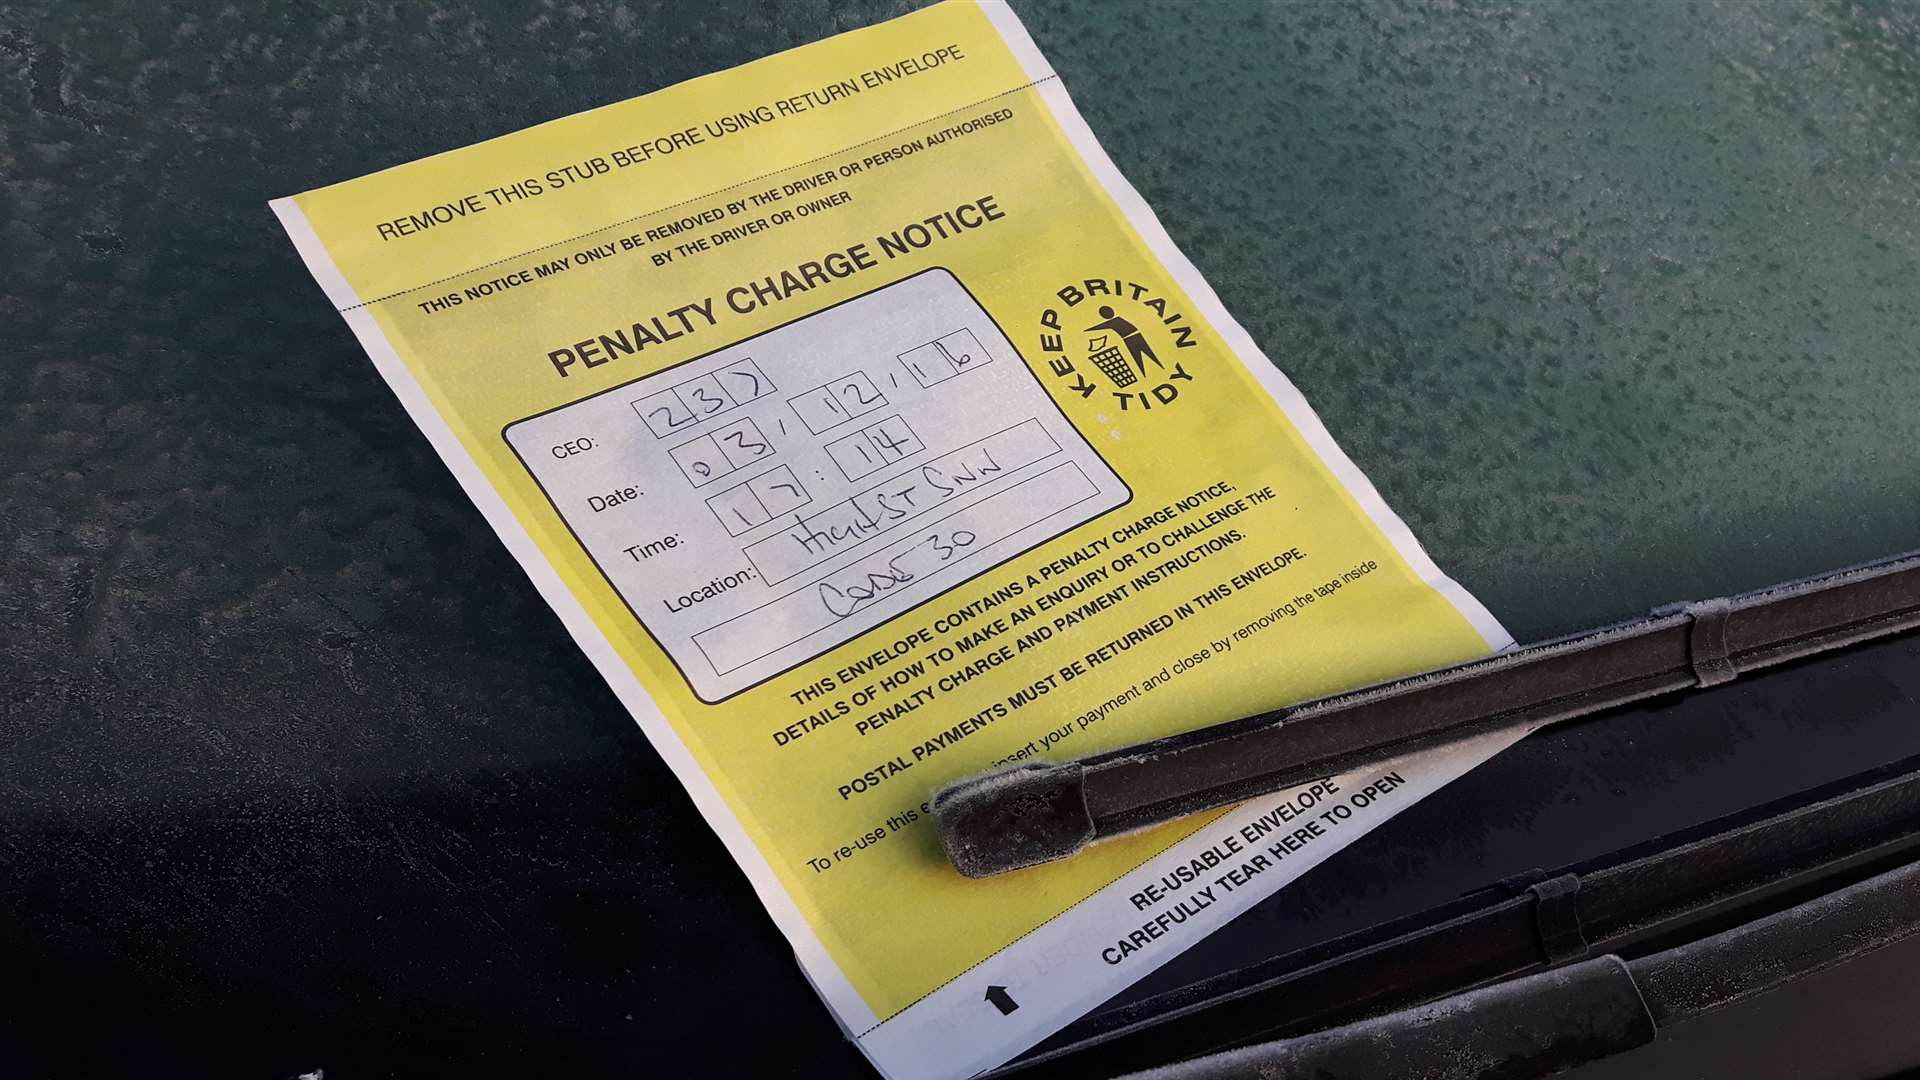 Figures today reveal the best councils to submit a parking fine appeal to